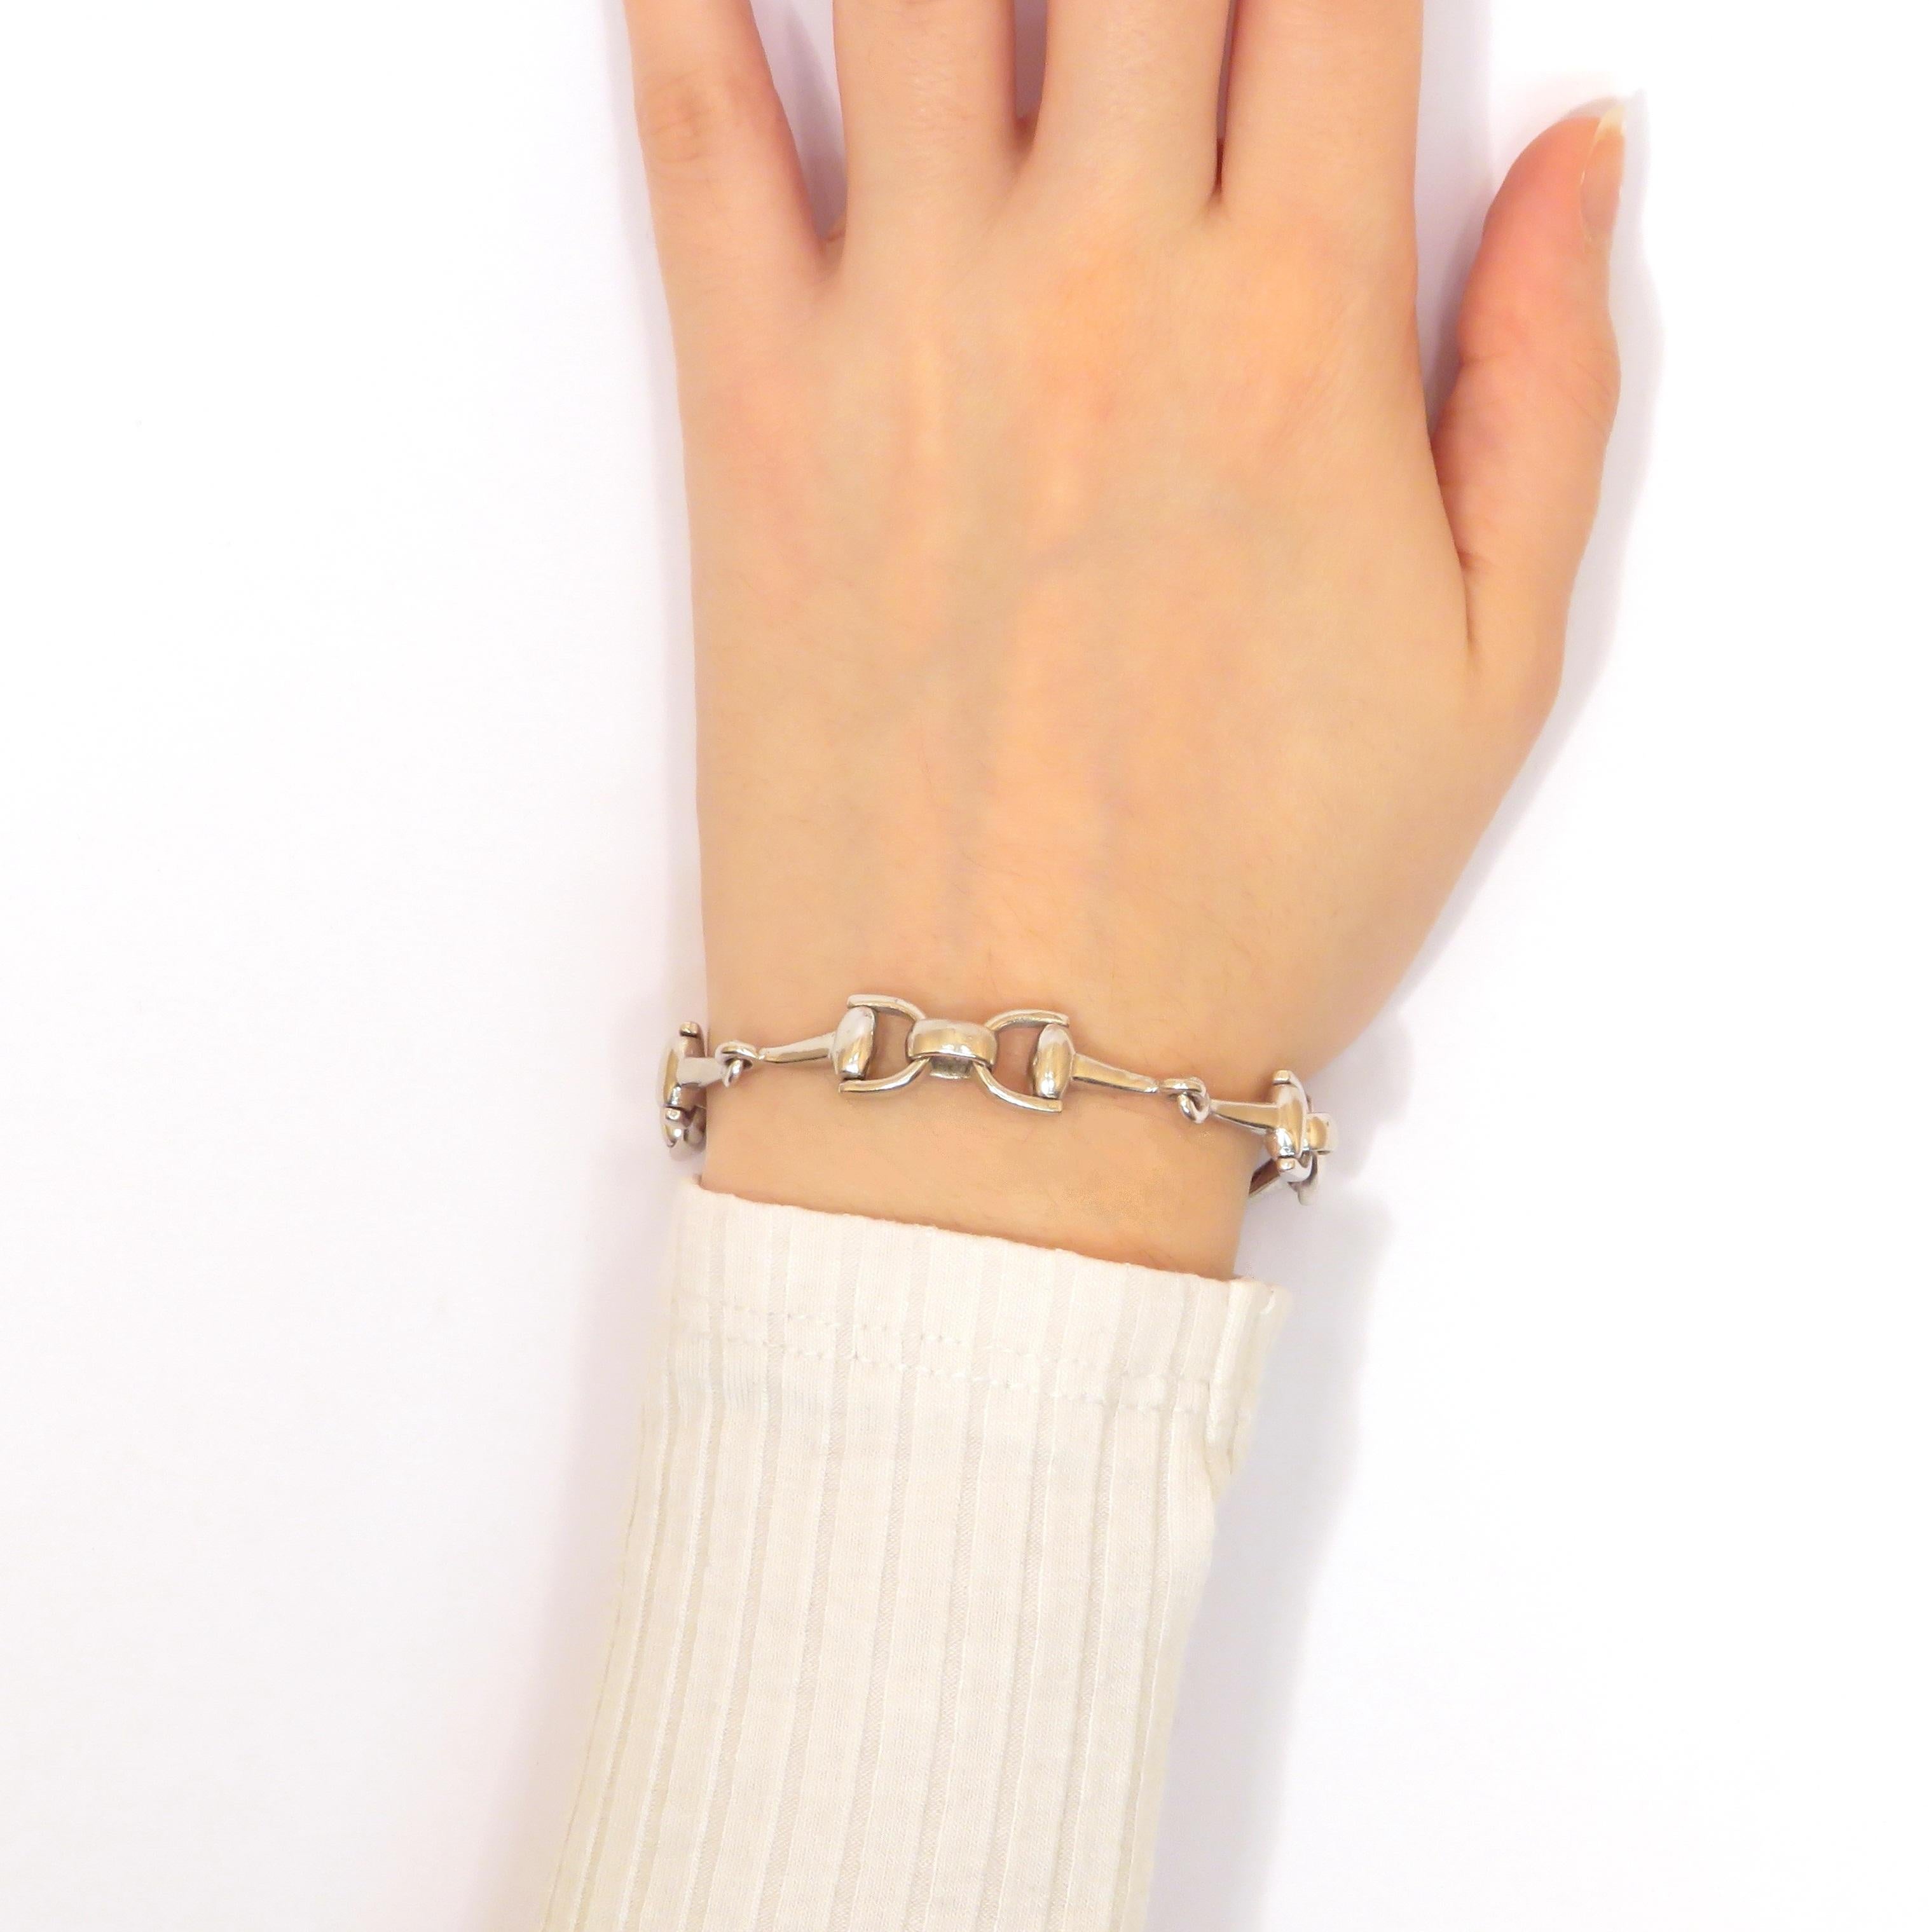 This very nice bracelet is crafted in solid silver 800 and features a repeated pattern of horse stirrups. It has a hidden hook clasp. The total length is 185 mm / 7.283 inches. It is marked with the Italian silver mark 800.

Crafted in: solid silver